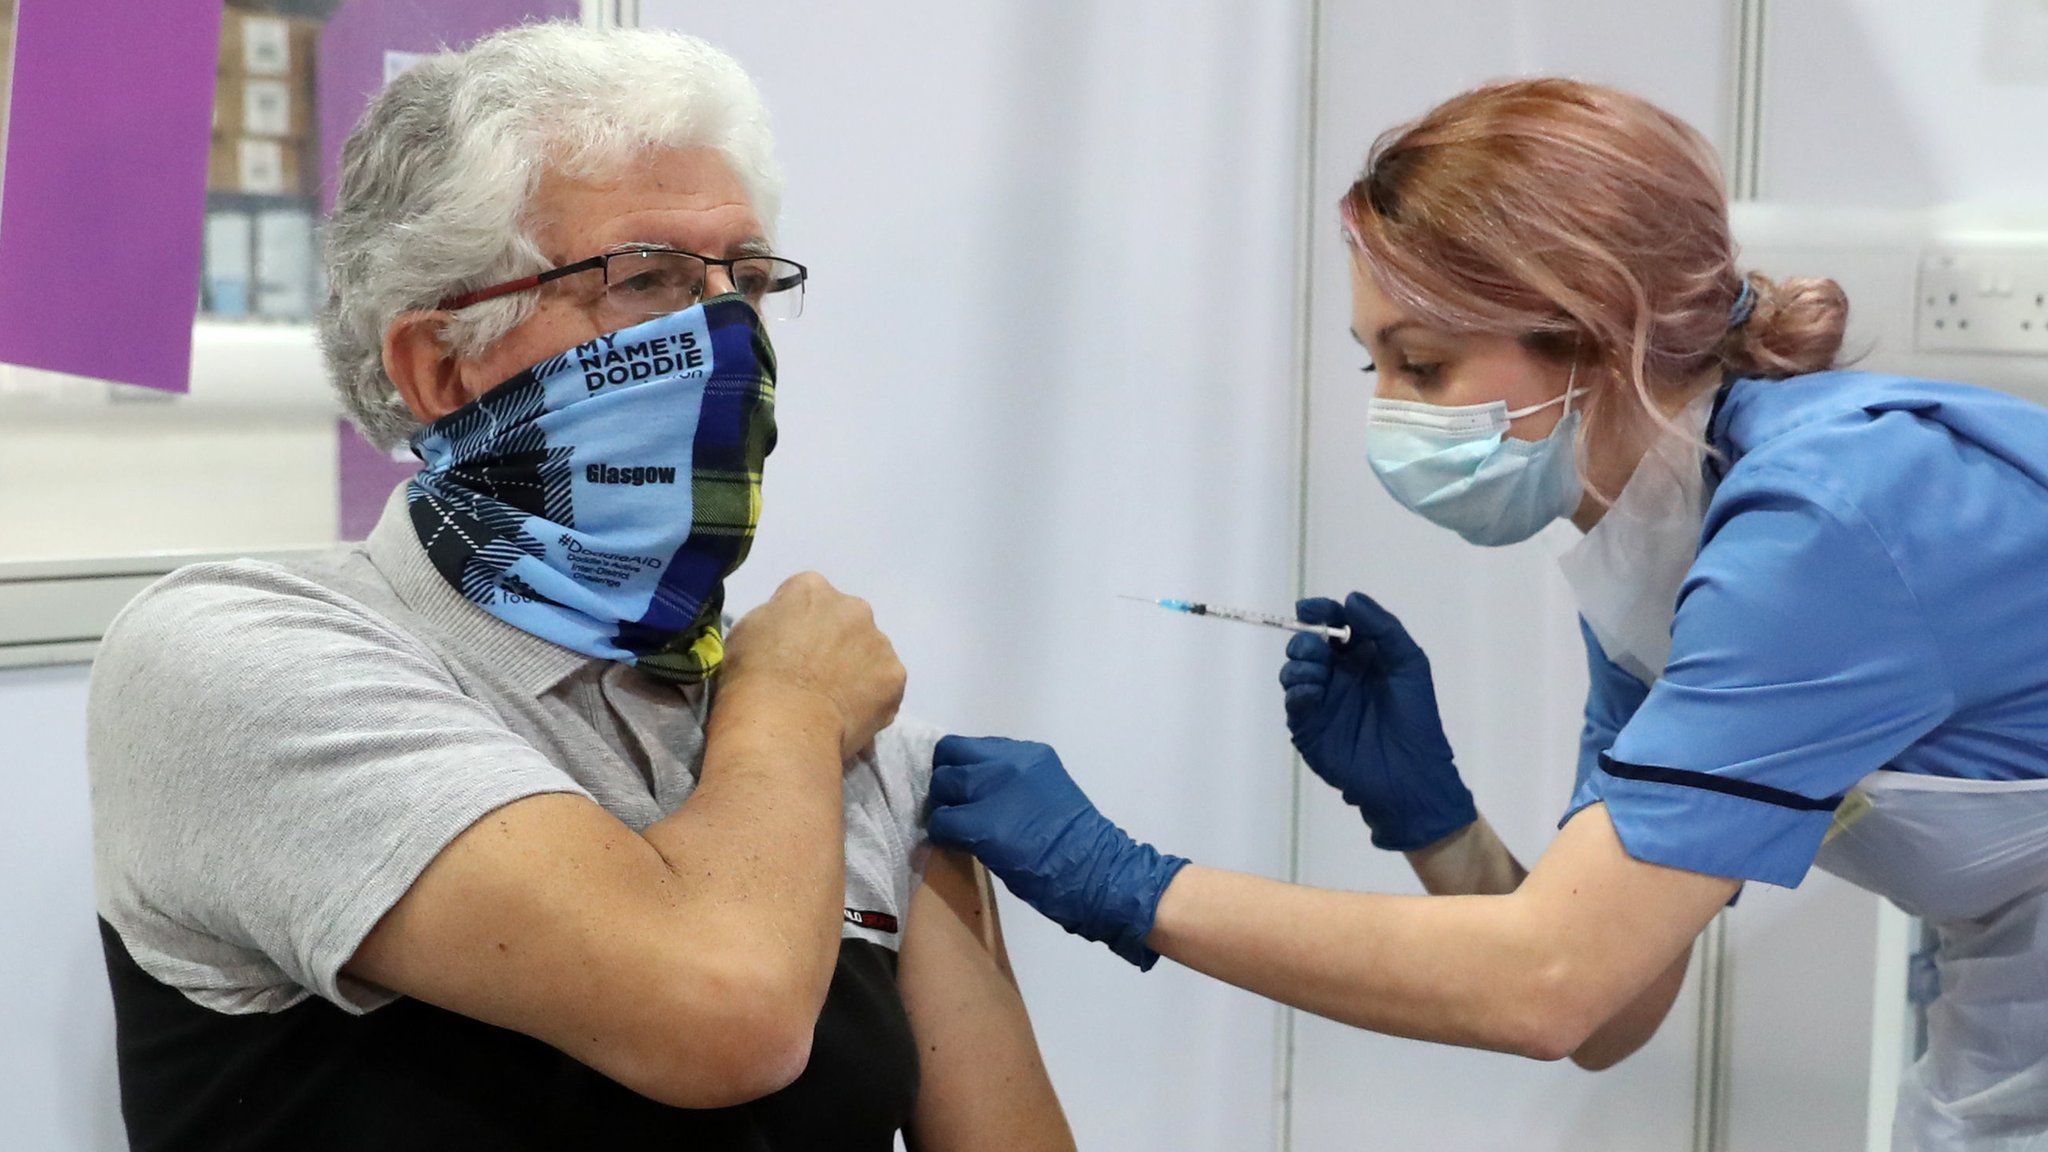 A man receives his Covid-19 vaccination in Glasgow.